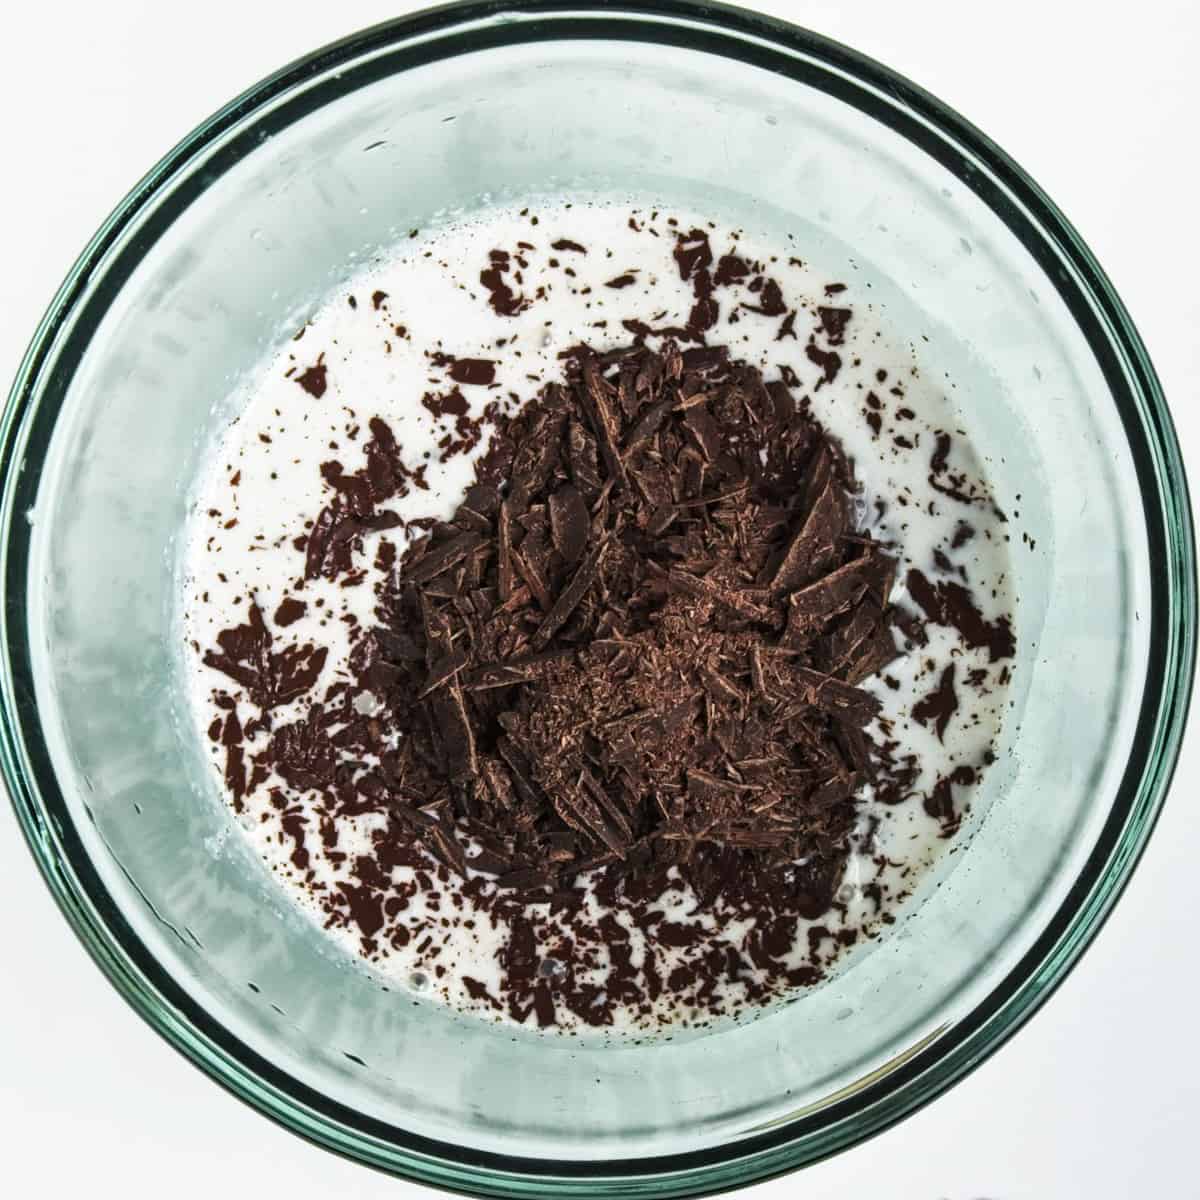 Finely chopped chocolate in a bowl with cococnut milk.